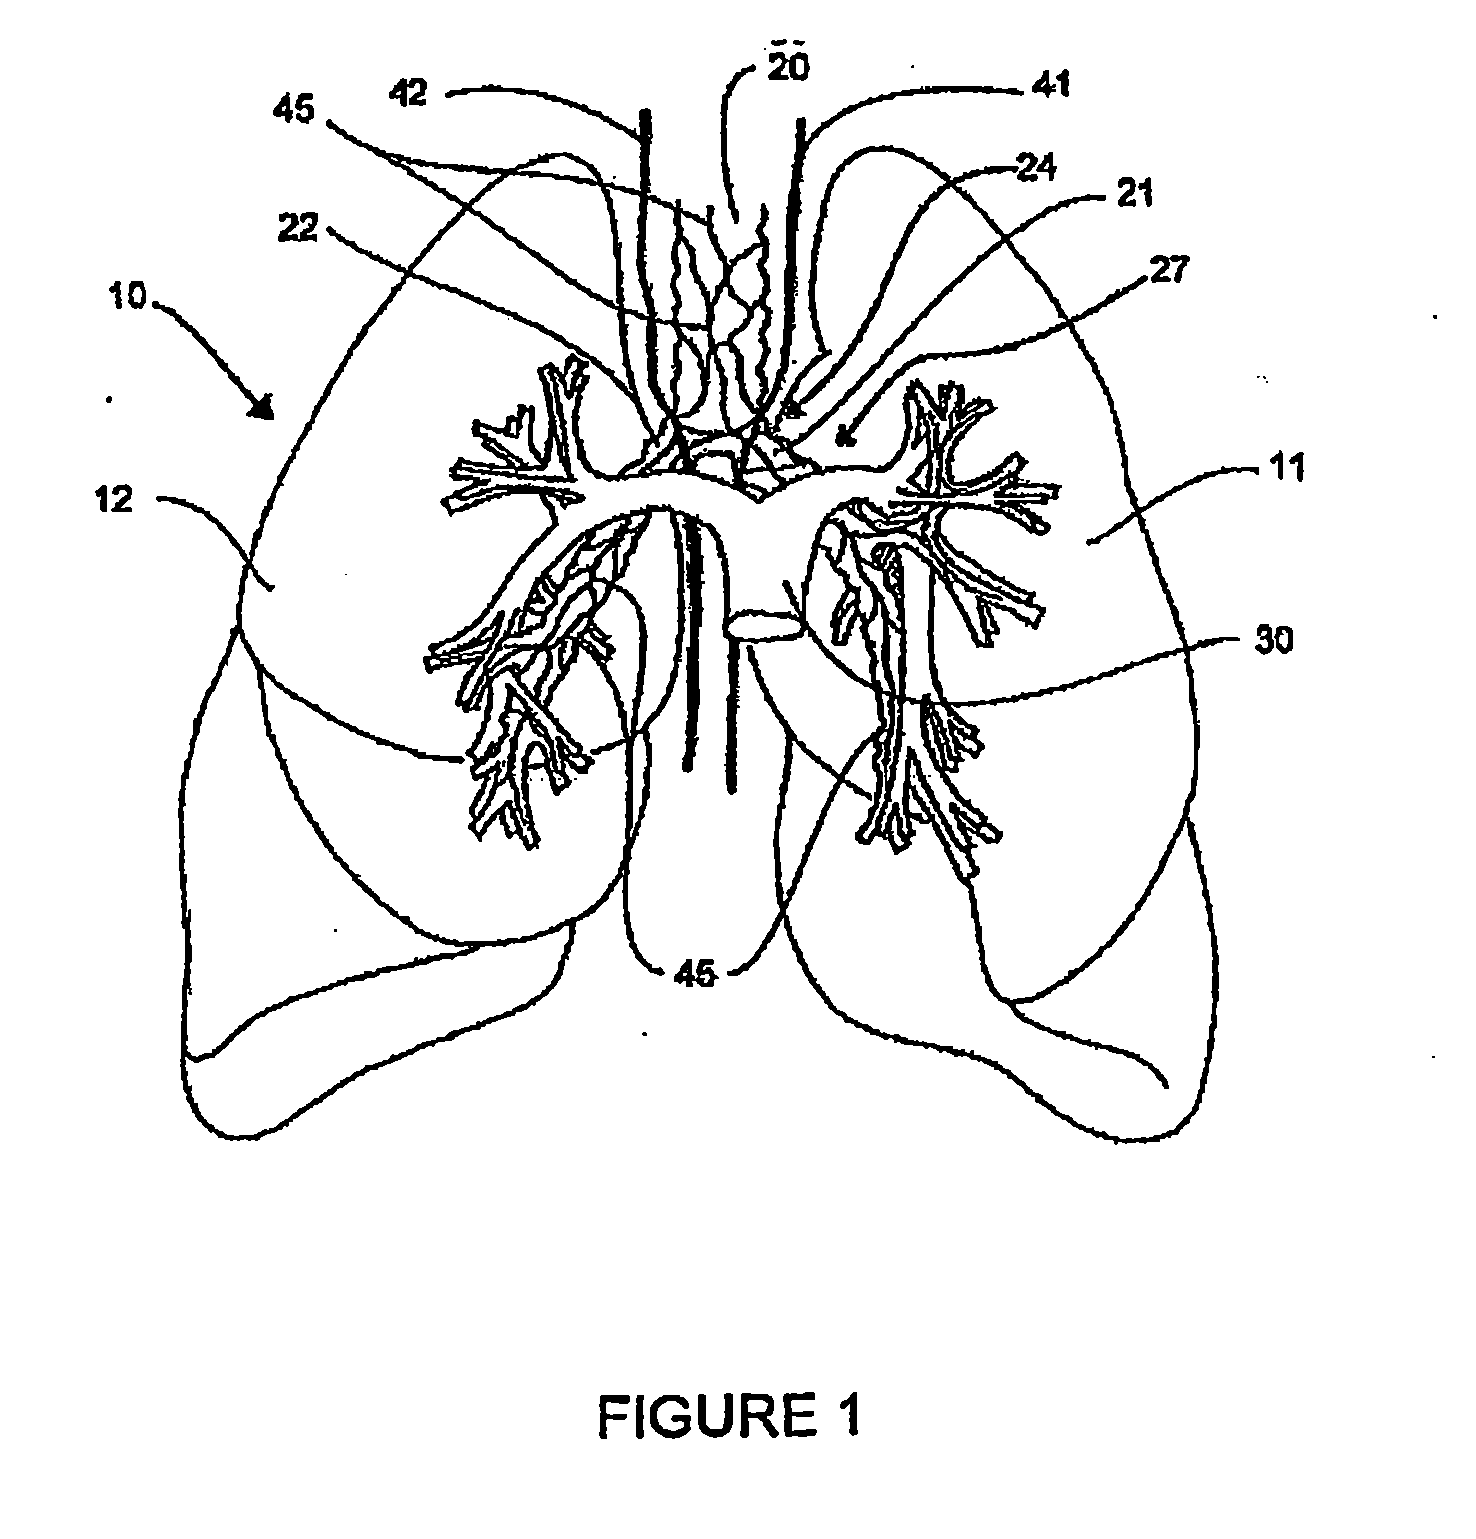 Systems, assemblies, and methods for treating a bronchial tree